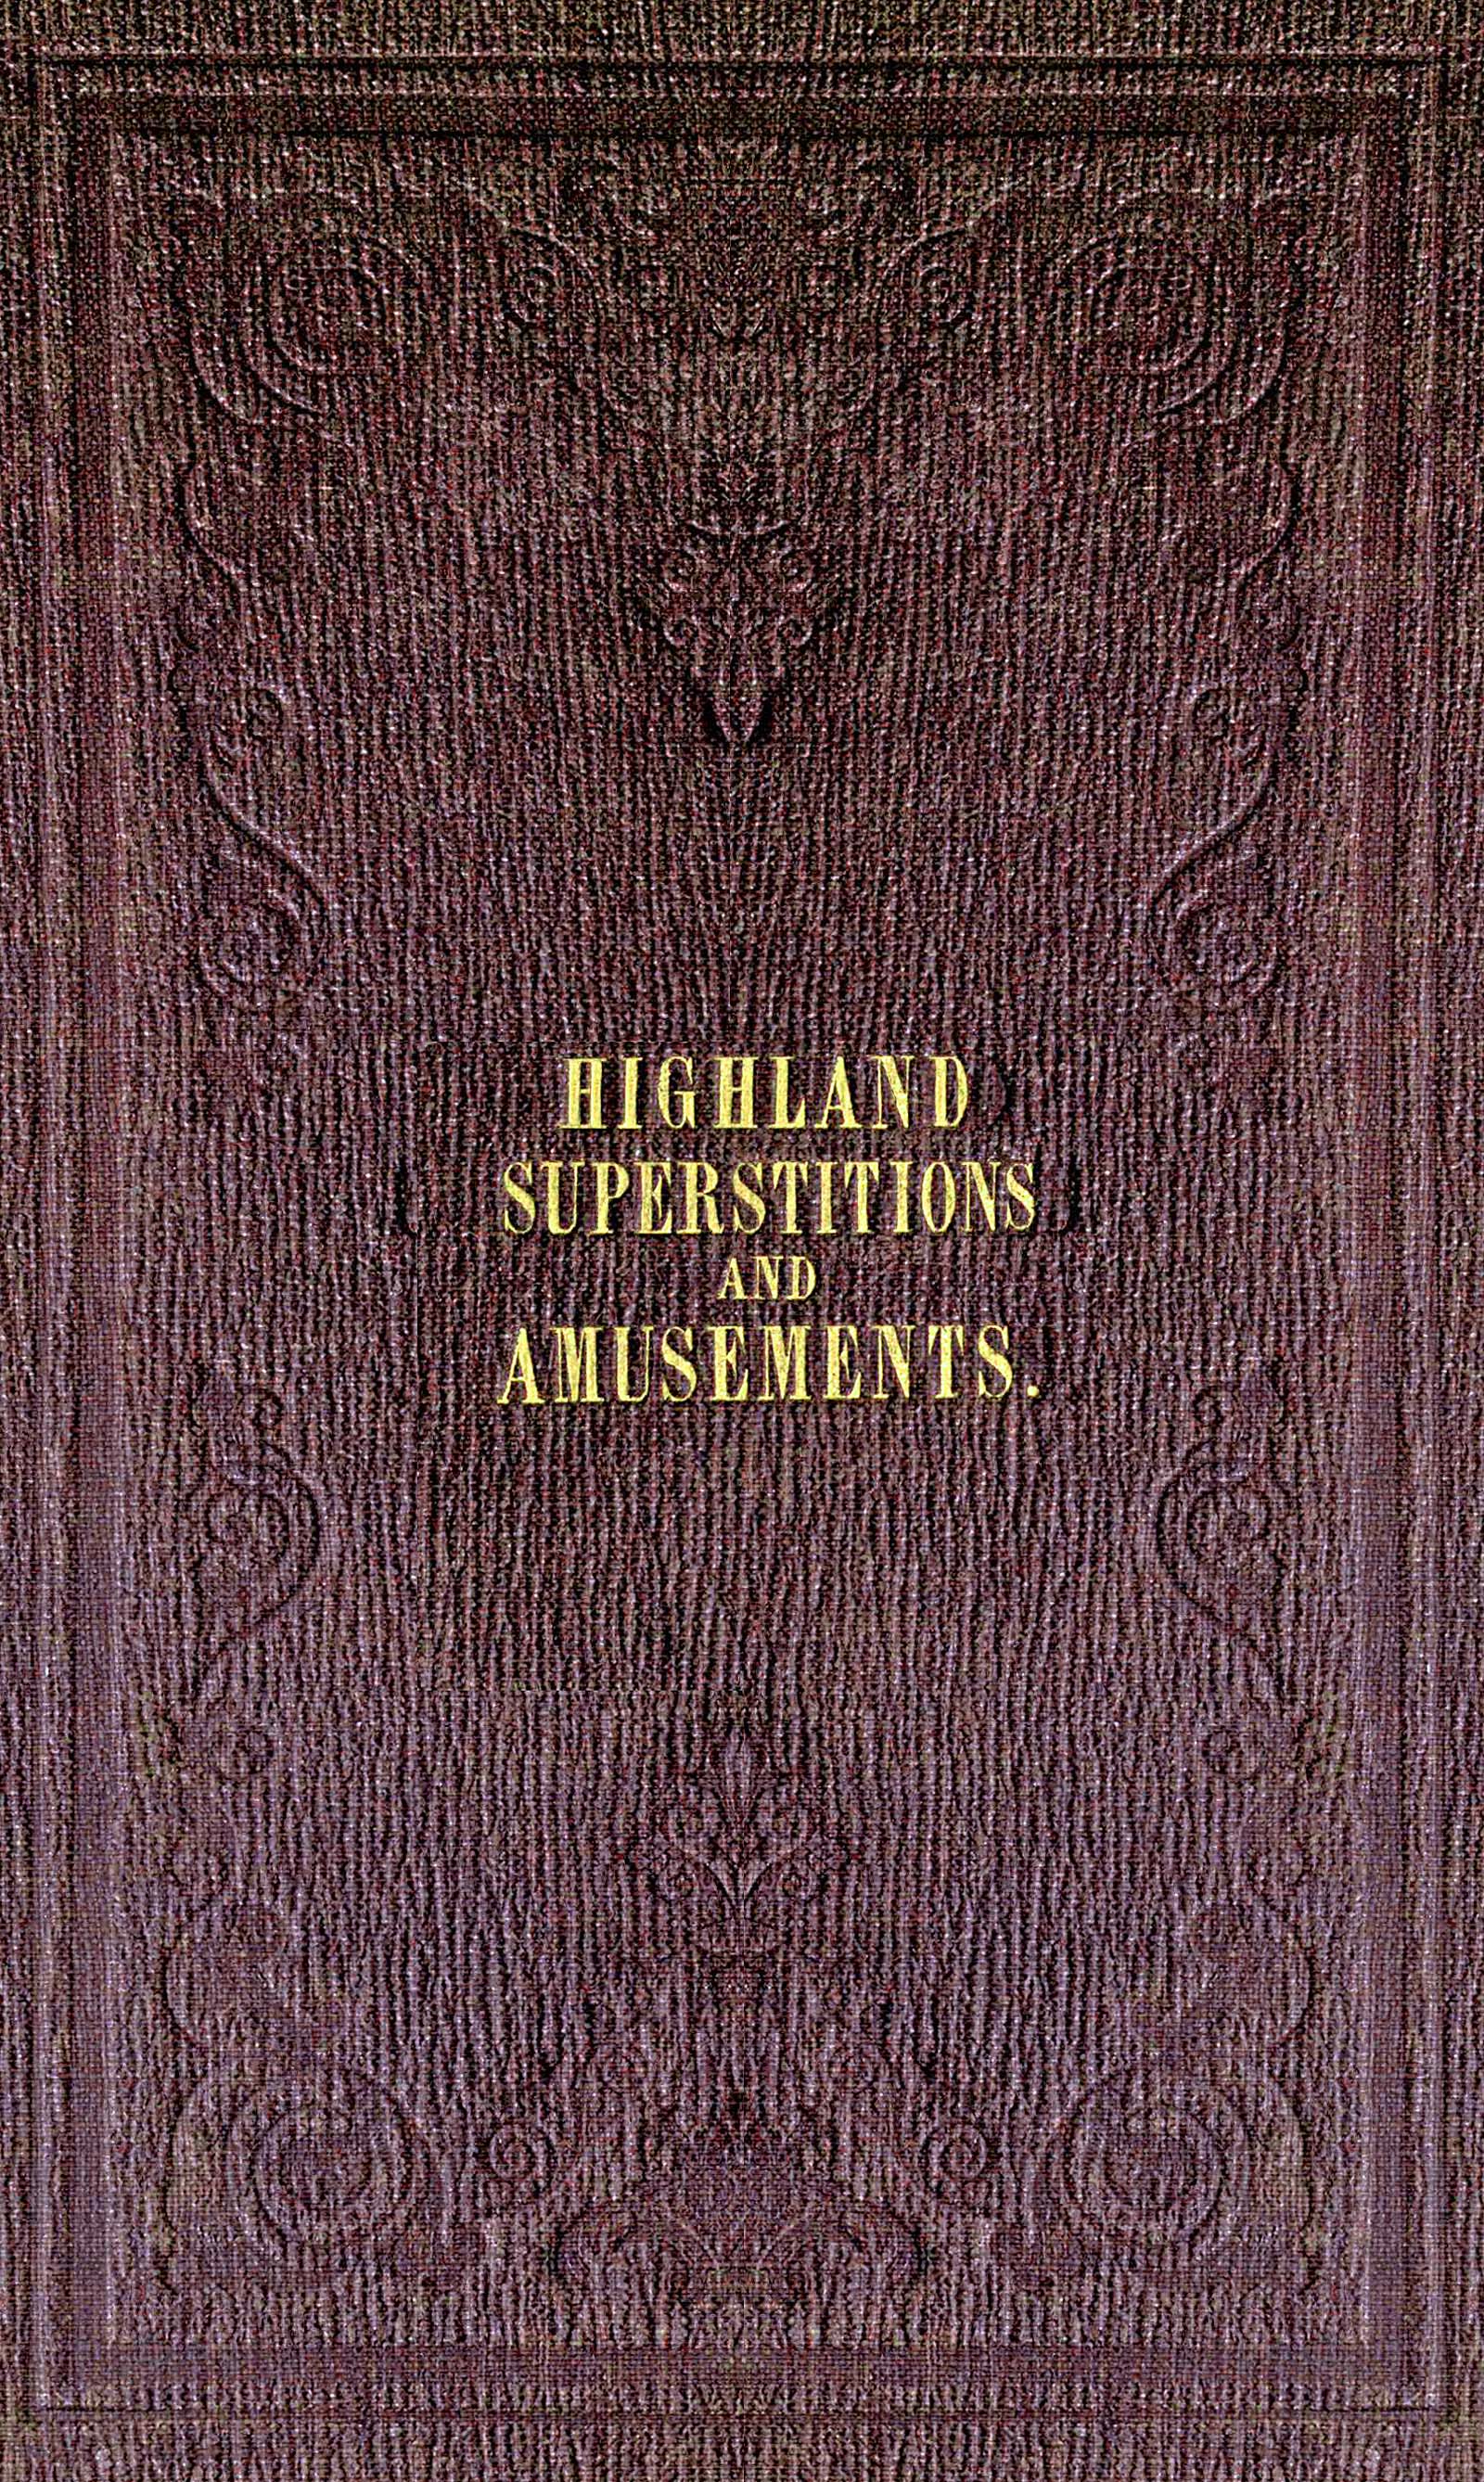 The popular superstitions and festive amusements of the Highlanders of Scotland, by William Grant Stewart—A Project Gutenberg eBook picture